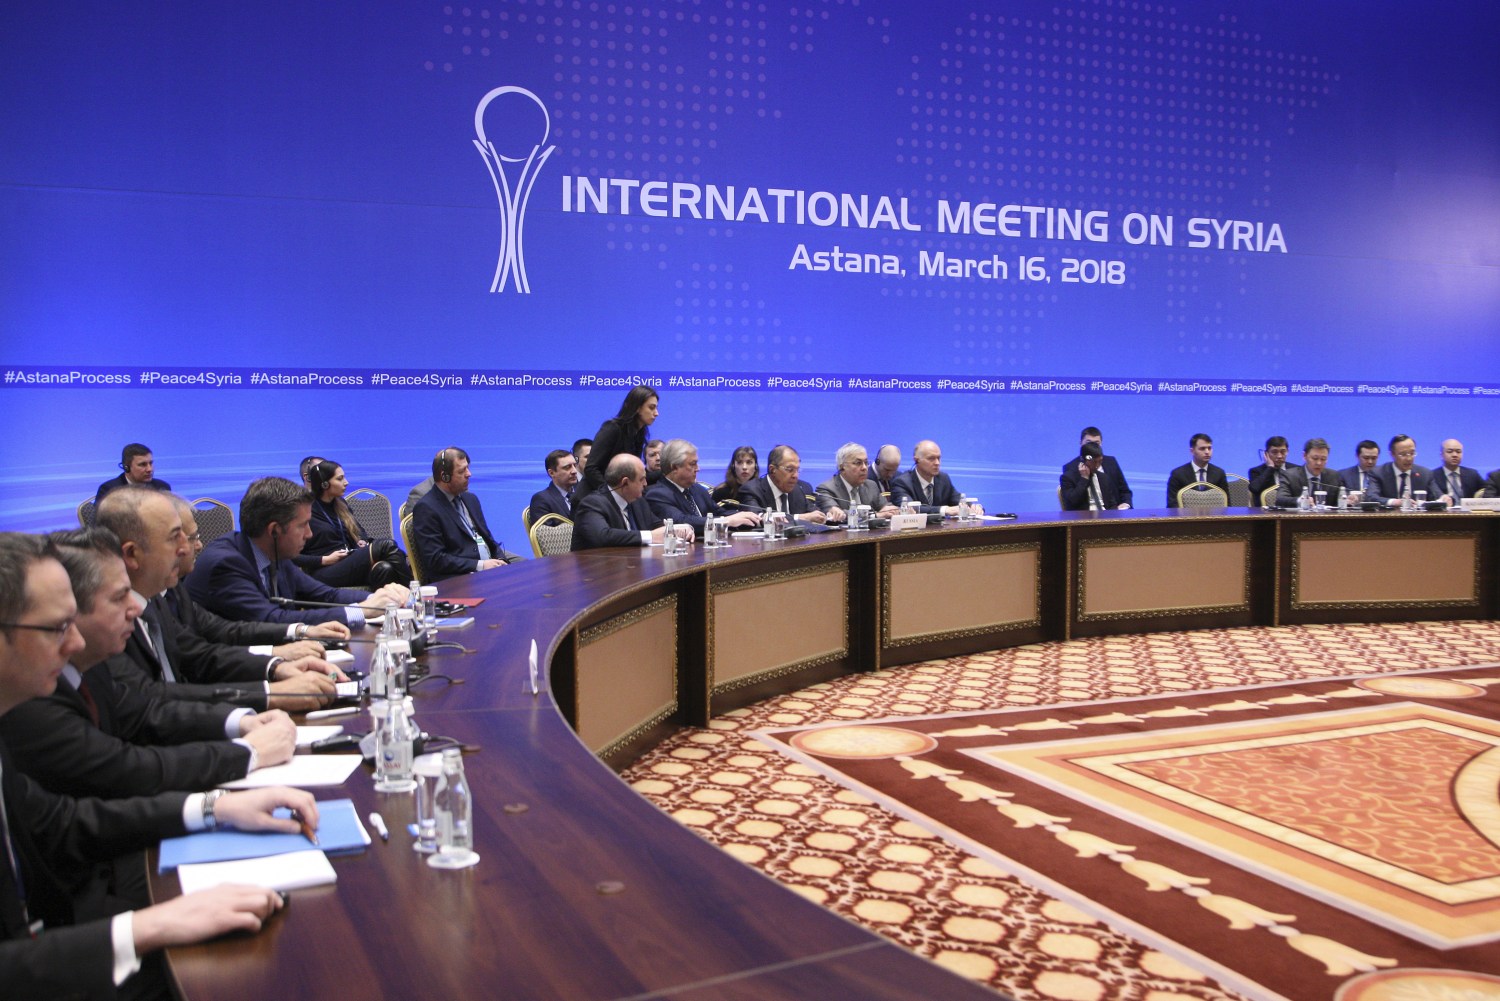 Members of the delegations take part in the international meeting on Syria in Astana